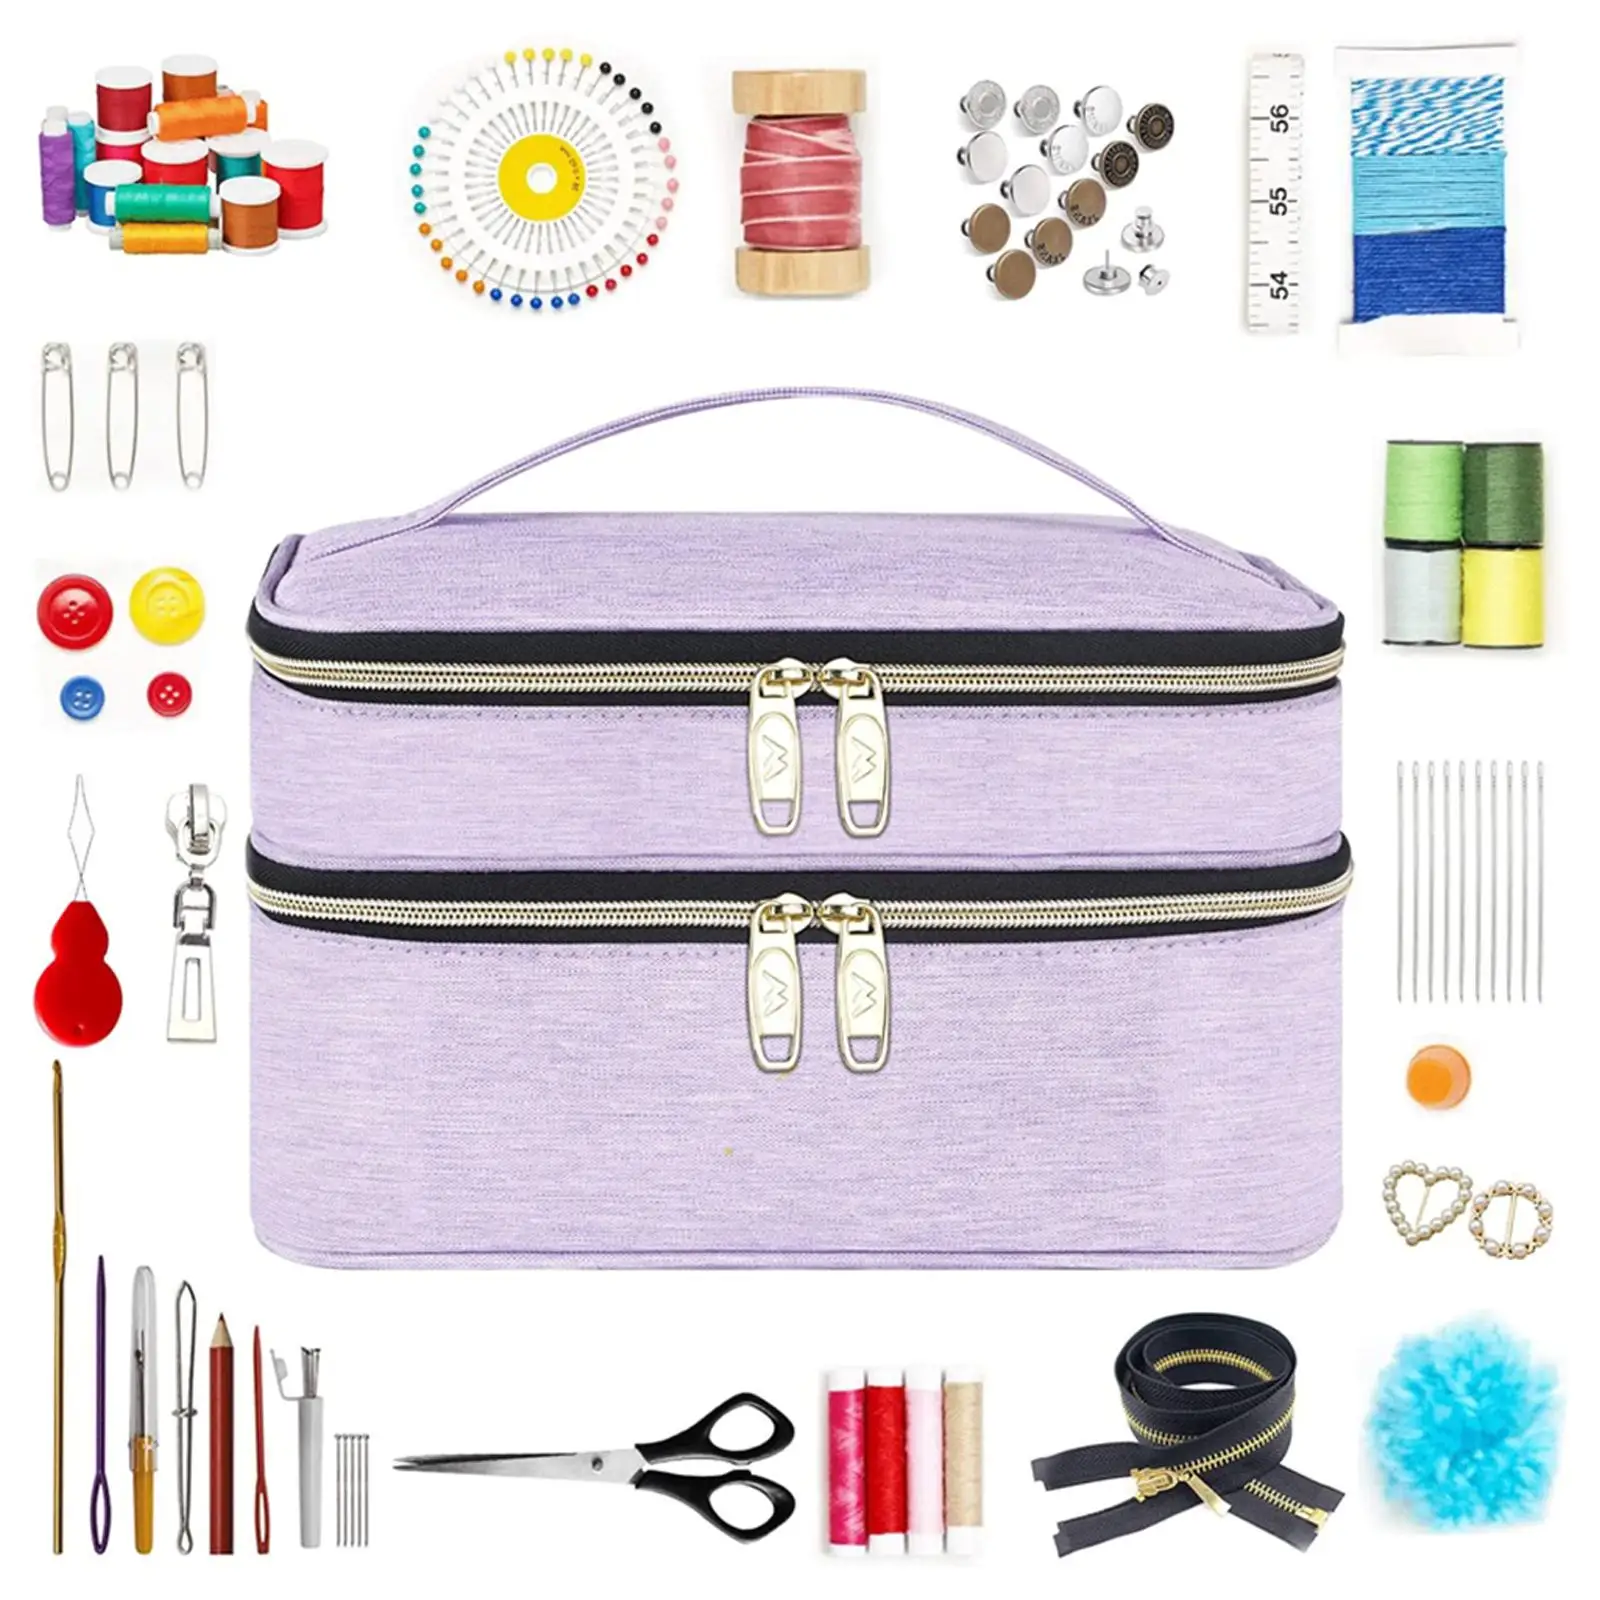 Sewing Supplies Storage Bag Double Layer Sewing Kits Carrying Bag Portable Polyester Case for Sewing Tools  Buttons Clips